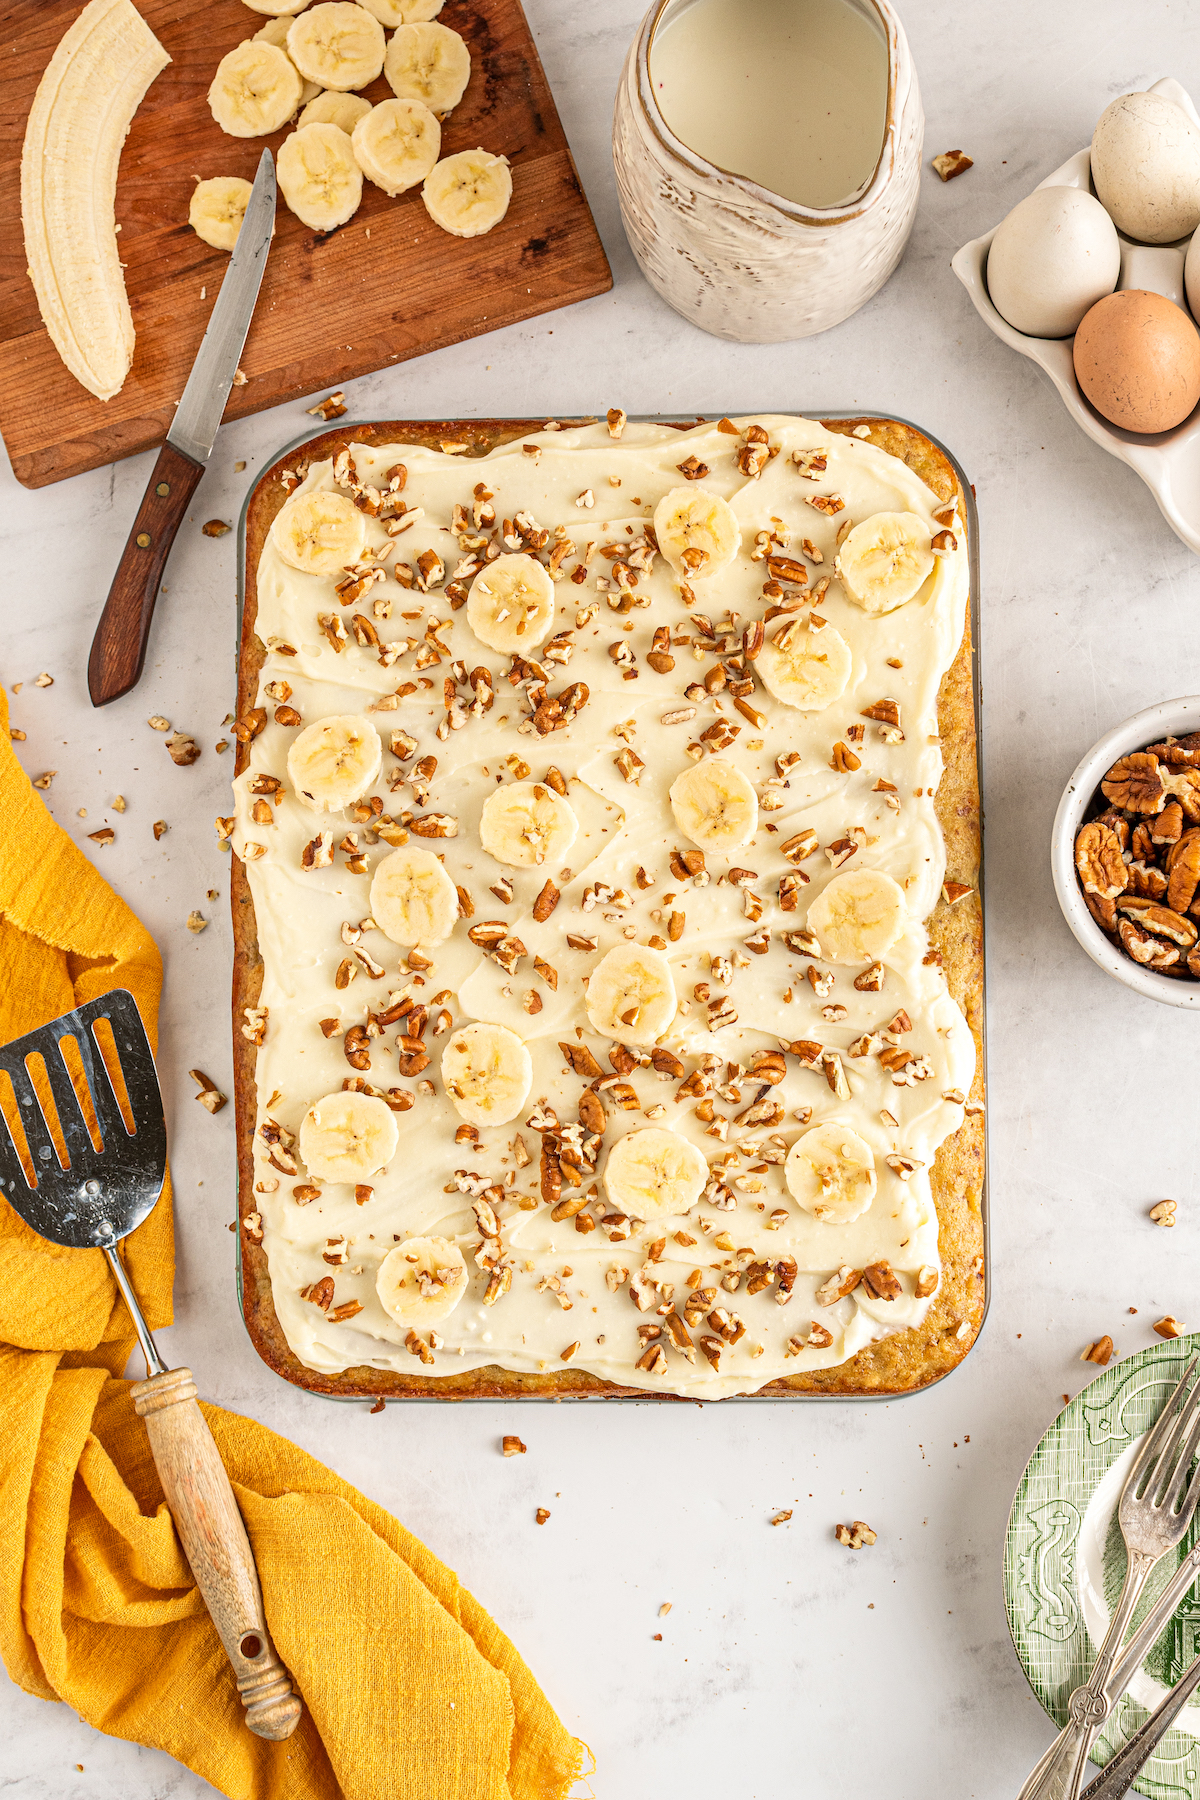 Banana bread cake on a table with sliced bananas, a bowl of pecans, a cloth napkin, and eggs.